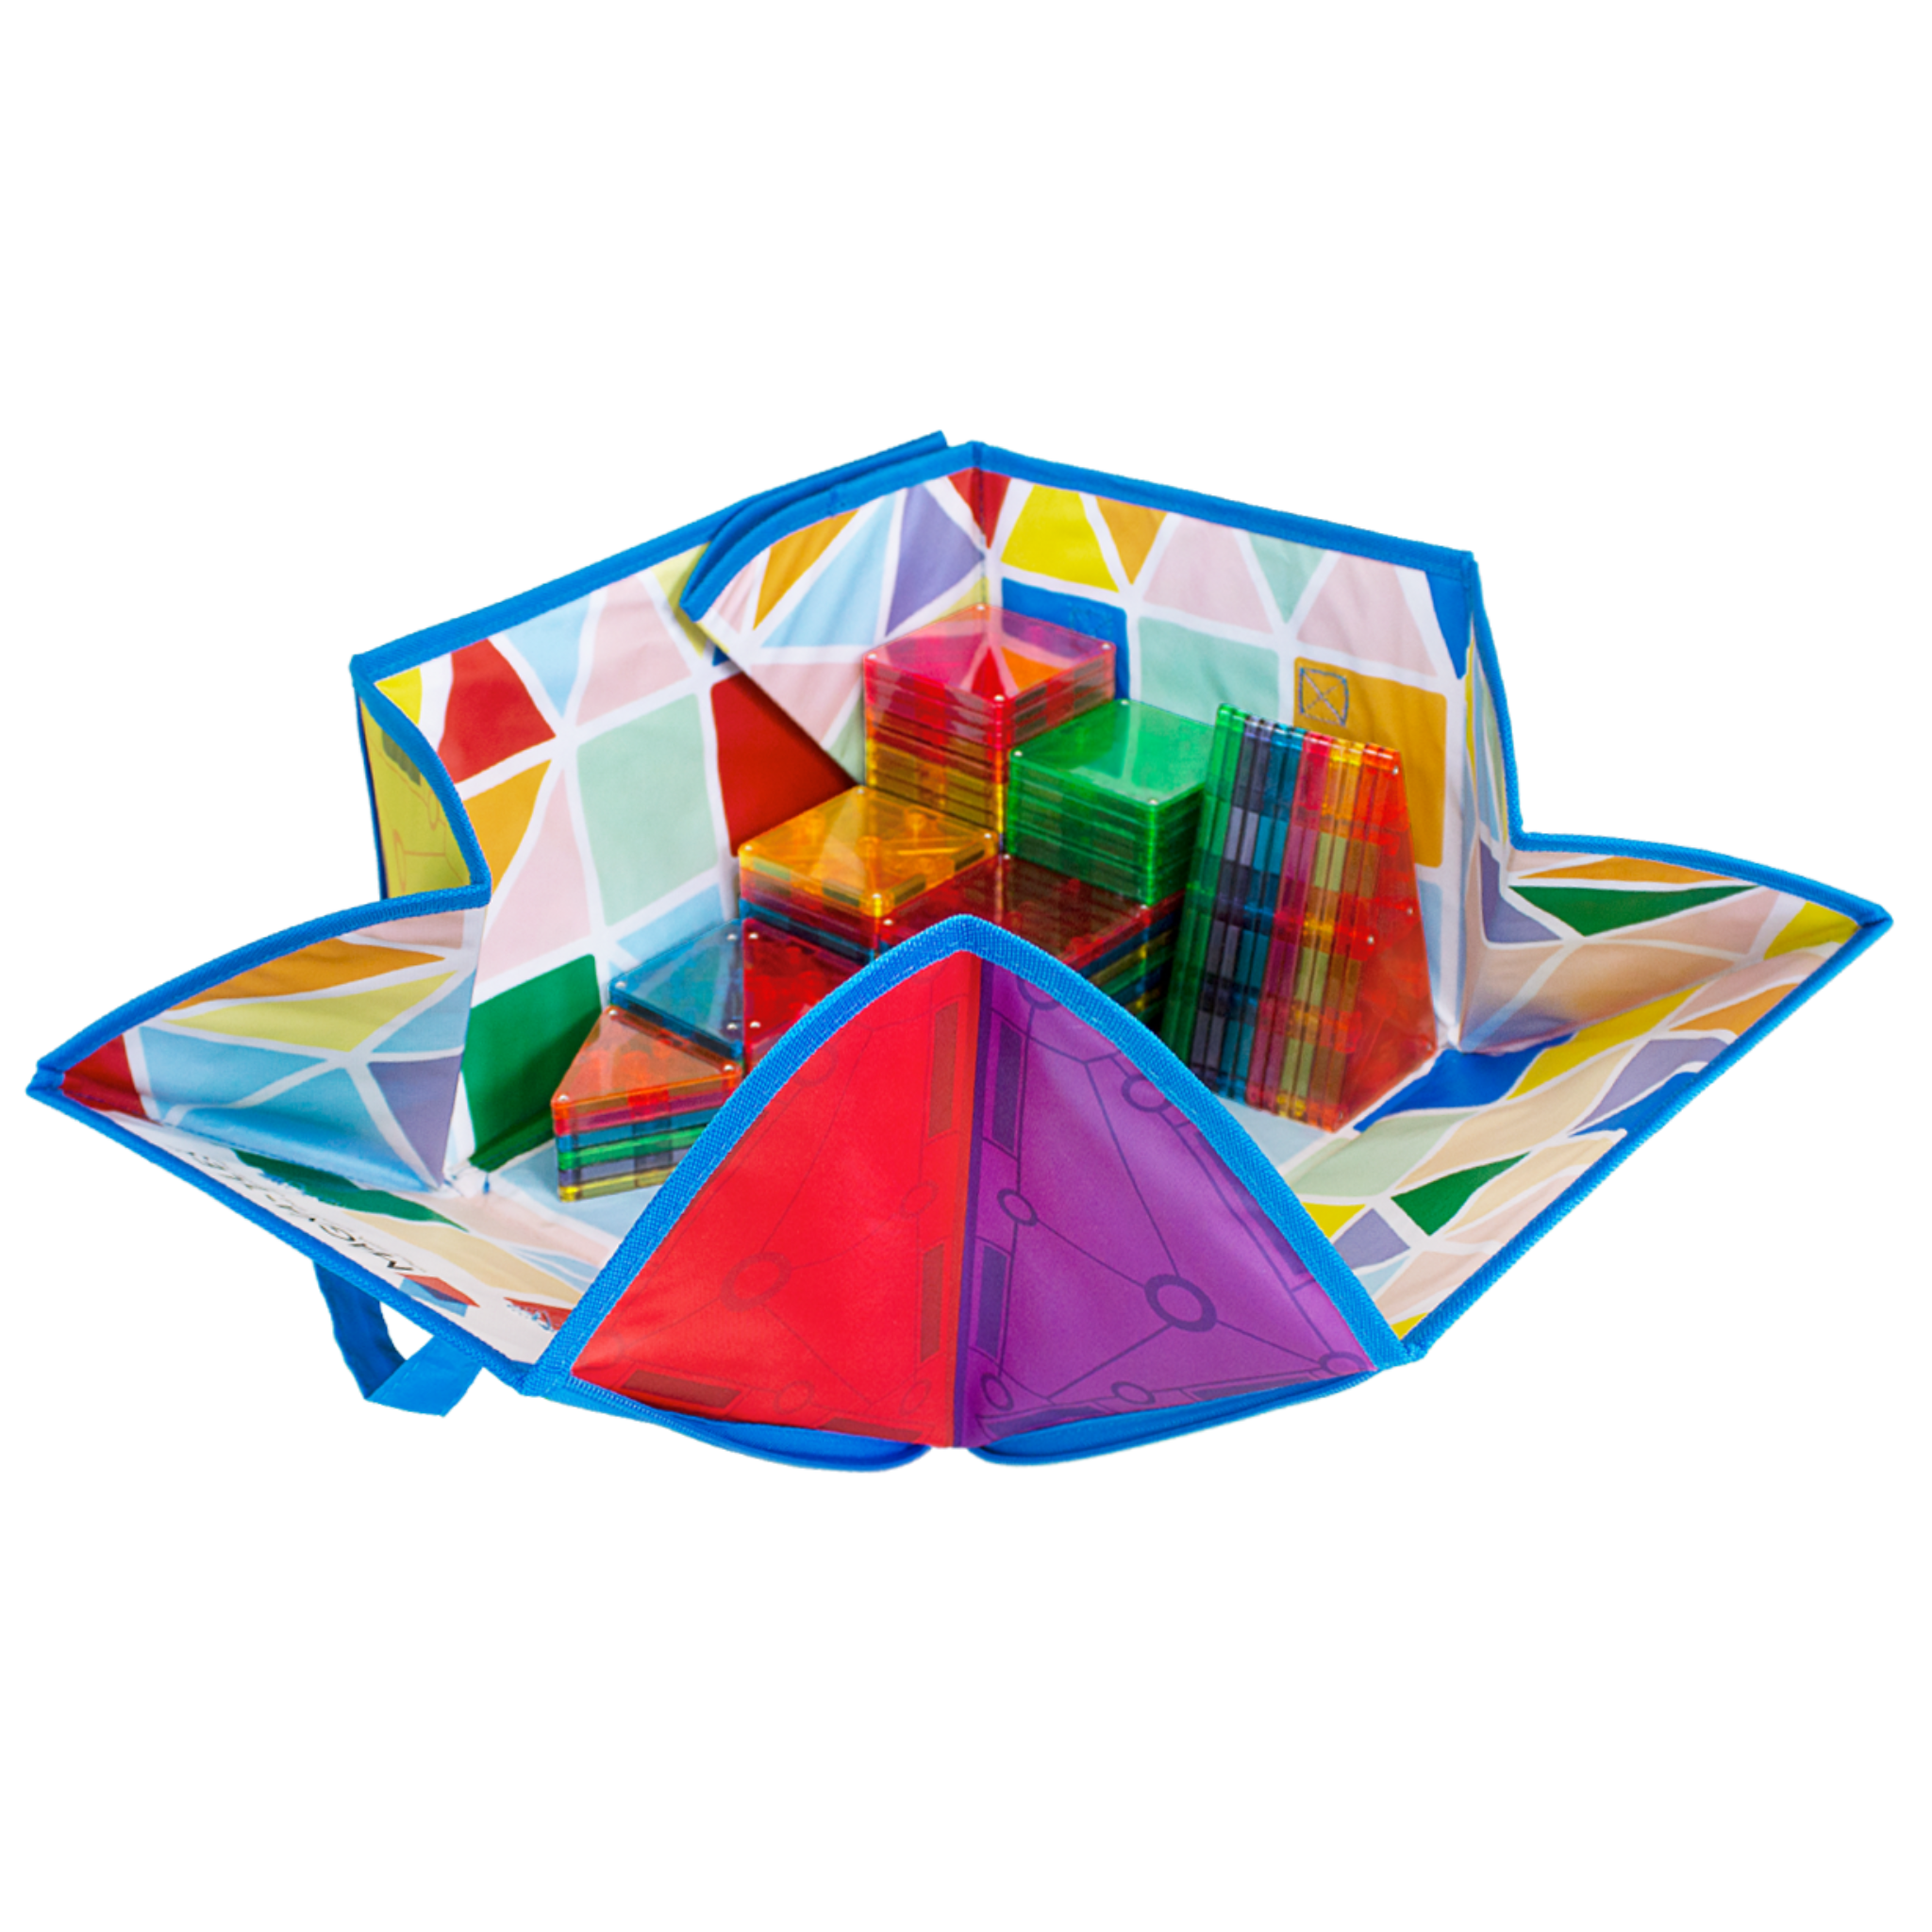 Kari on Instagram: MAGNA-TILES knows what kids AND parents want this  holiday season! This storage bin is a sturdy one, perfect for the weight of  up to 300 MAGNA-TILES. Designed for easy